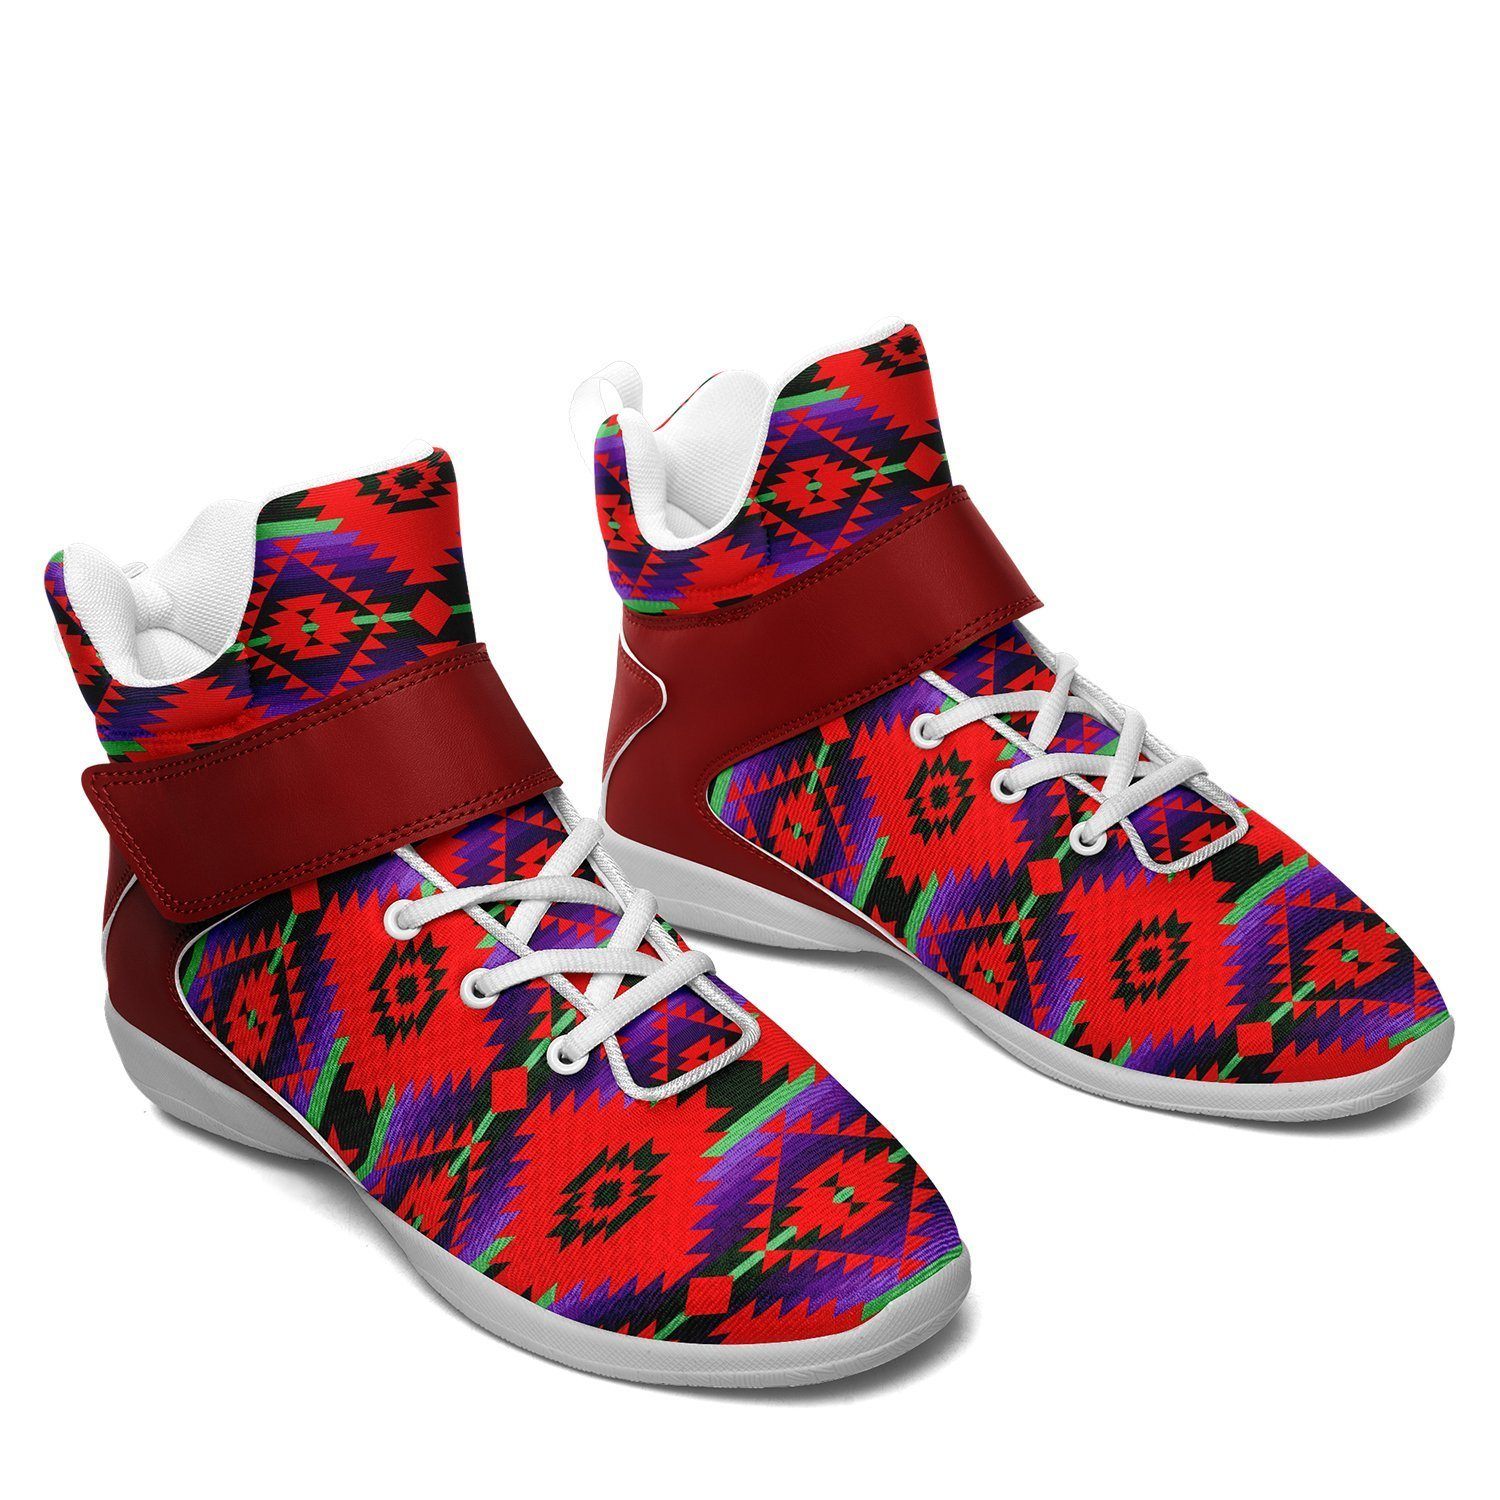 Cree Confederacy Chicken Dance Ipottaa Basketball / Sport High Top Shoes - White Sole 49 Dzine 